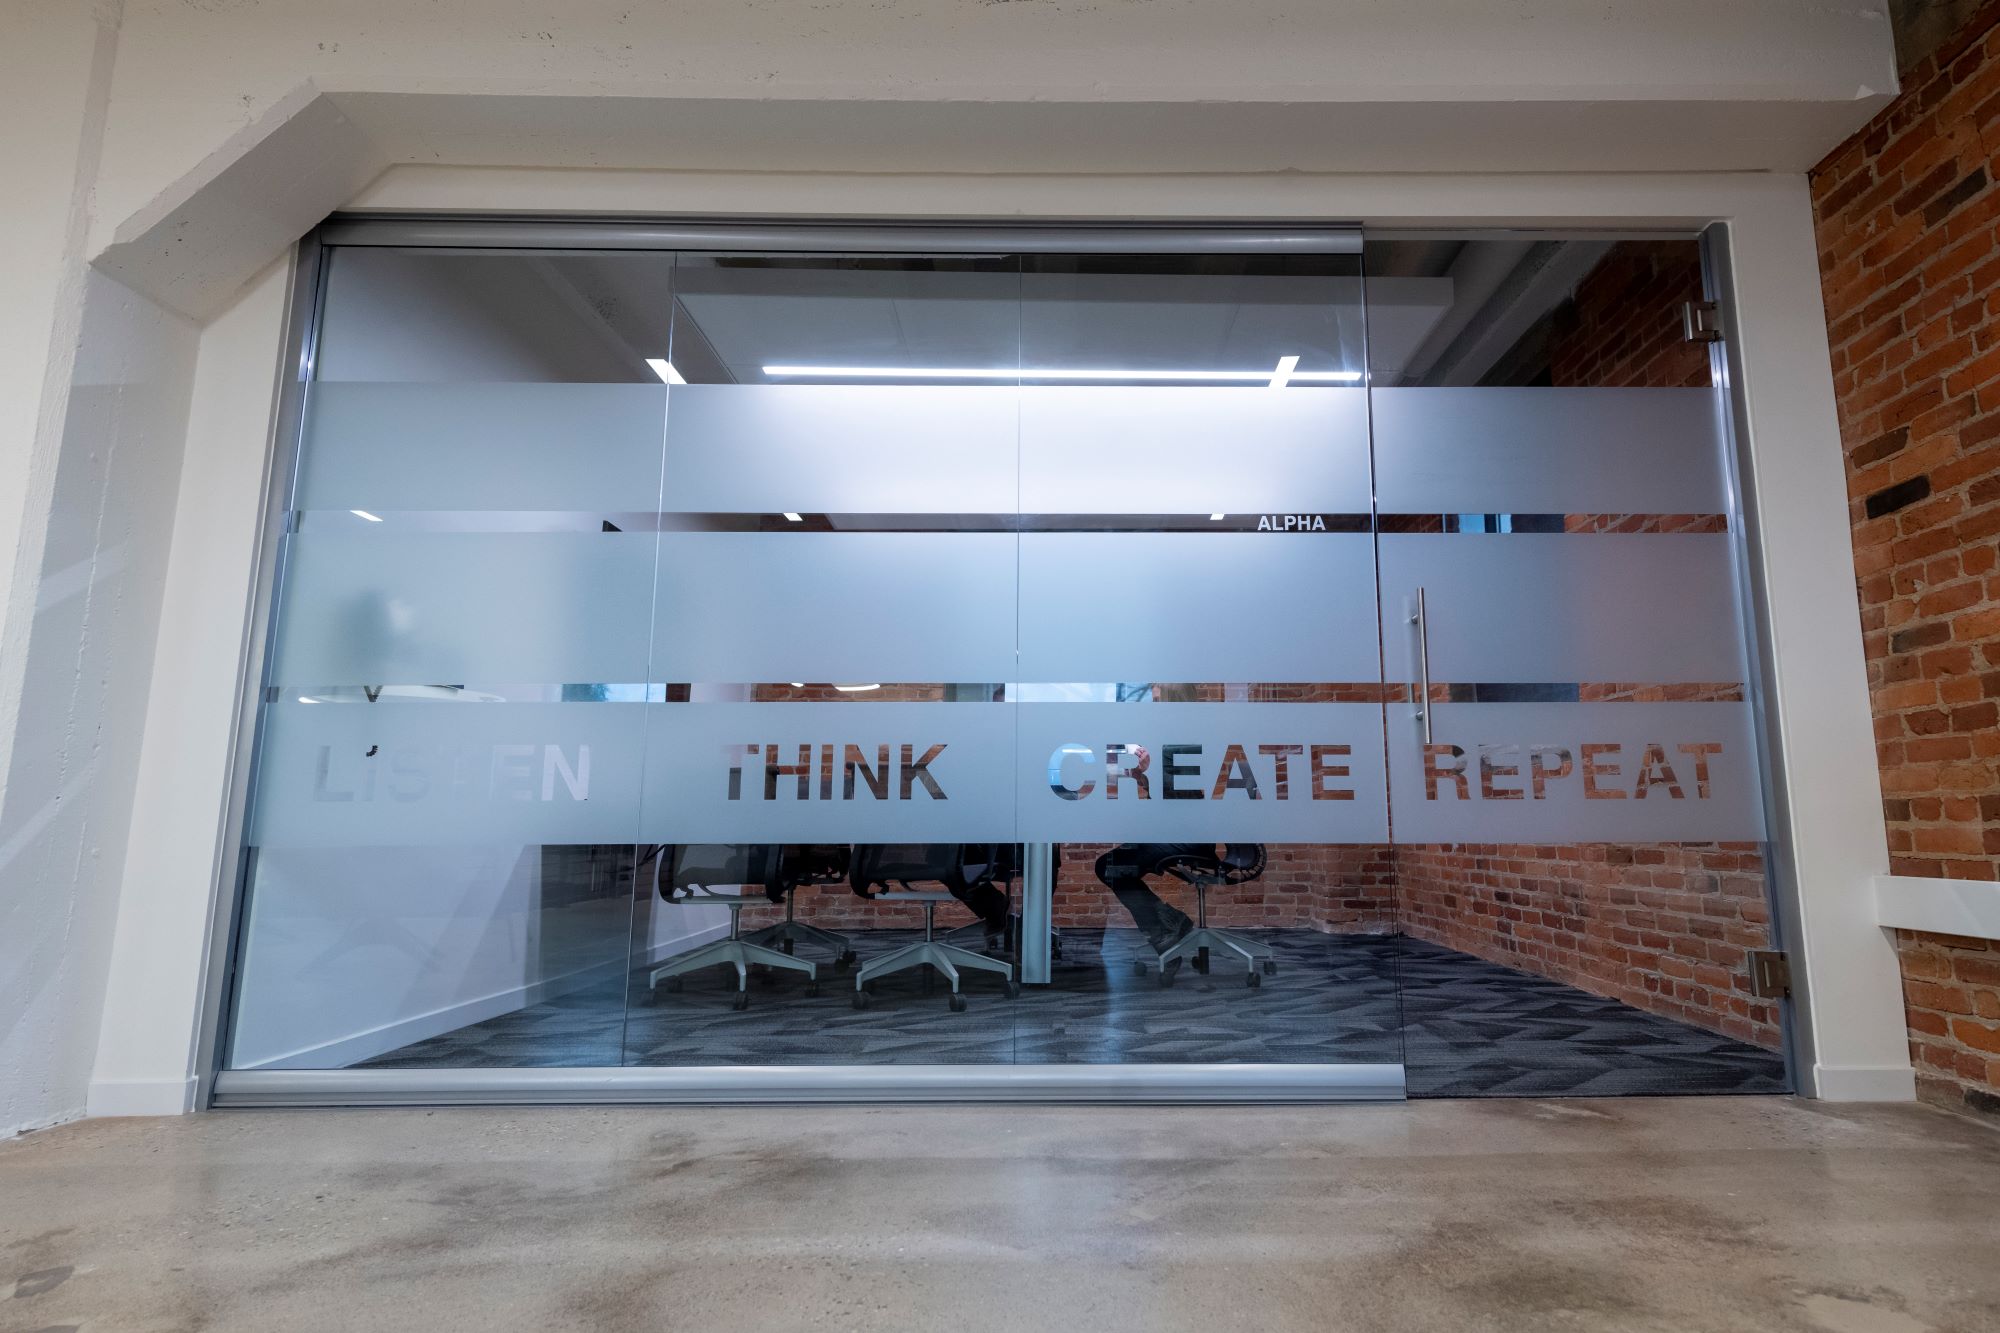 MKM architecture + design private meeting room that says listen, think, create, repeat, on glass